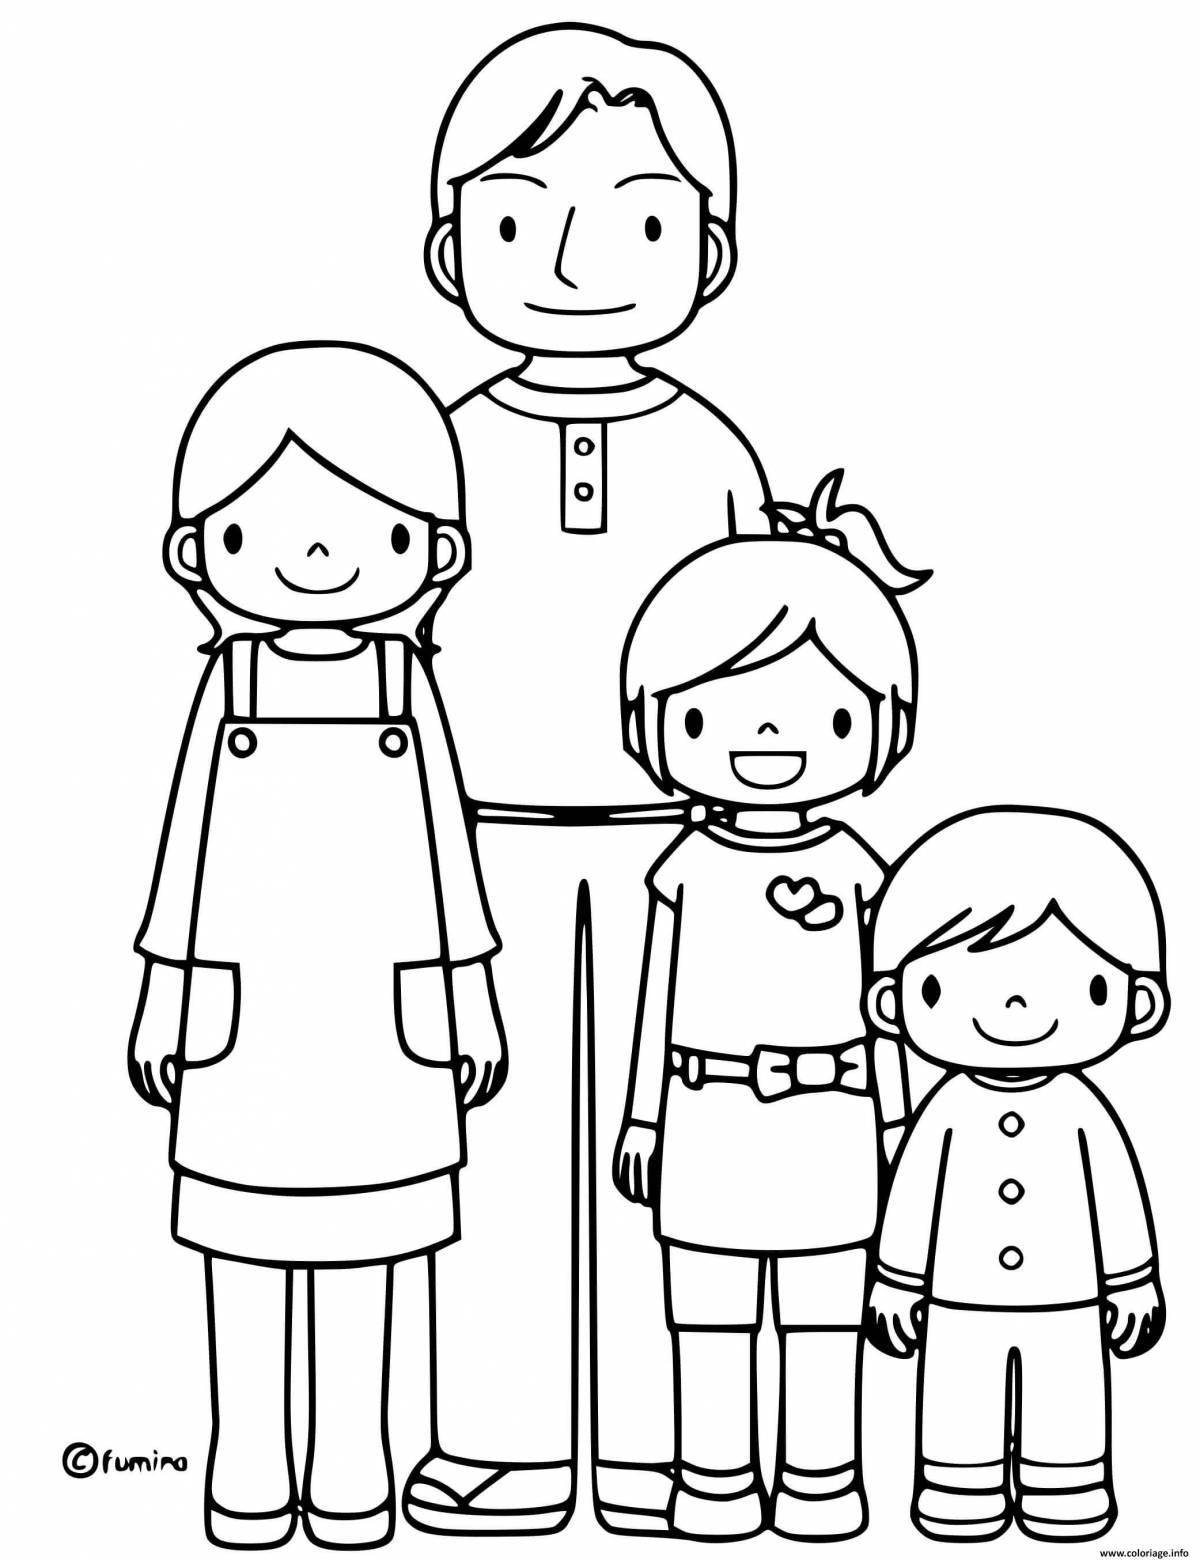 Coloring page cheerful brother and sister